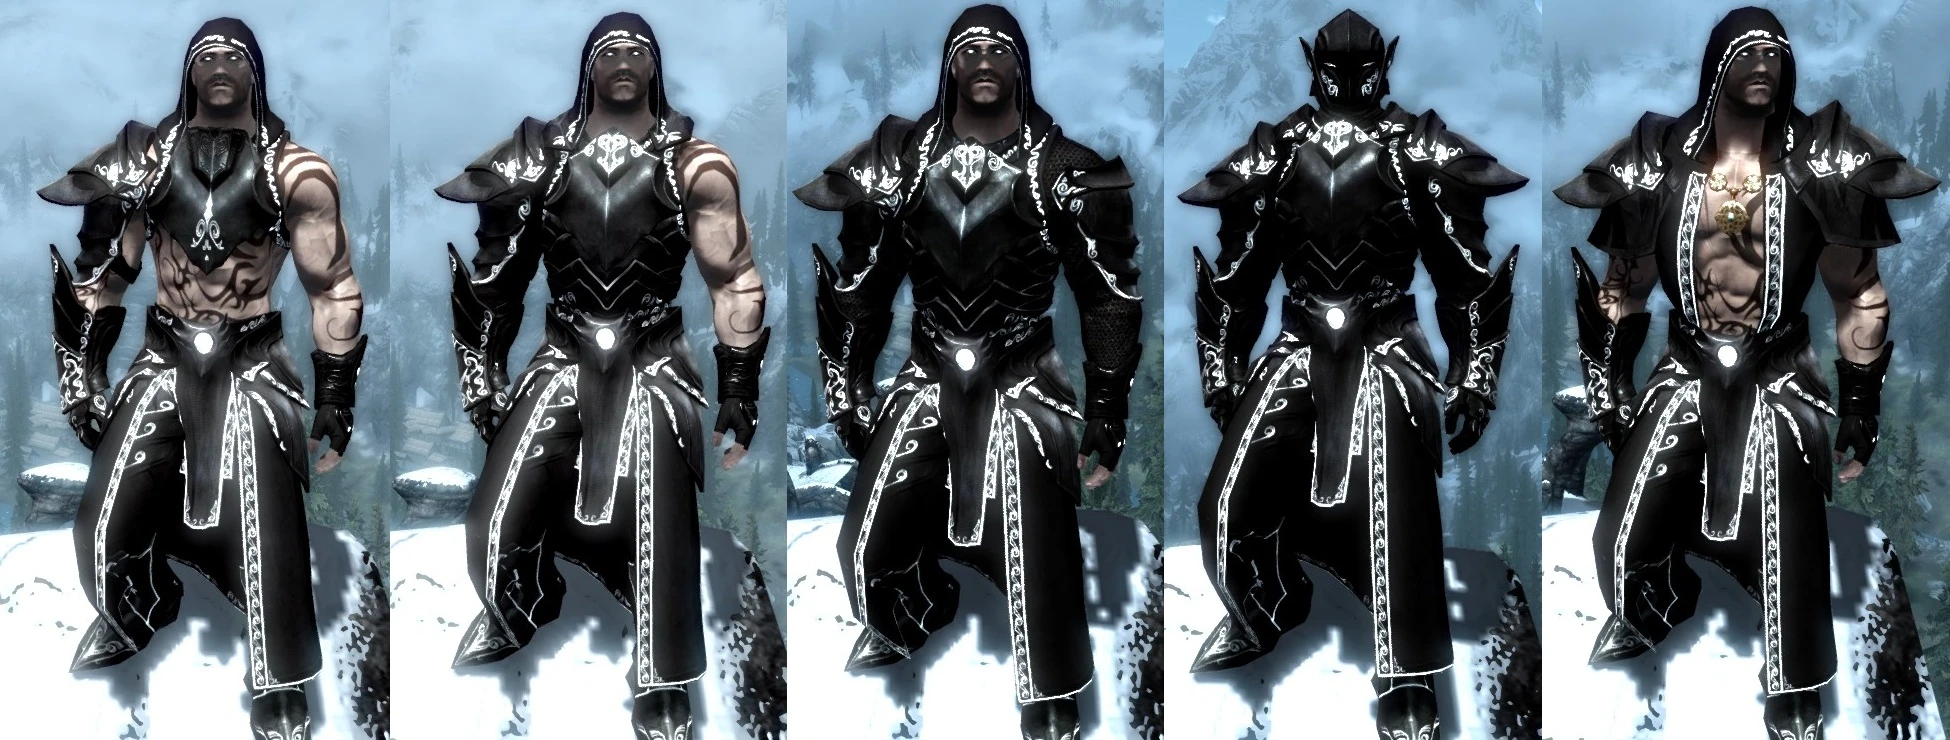 Male Cleric Armor Variants Sse At Skyrim Special Edition Nexus Mods, male c...